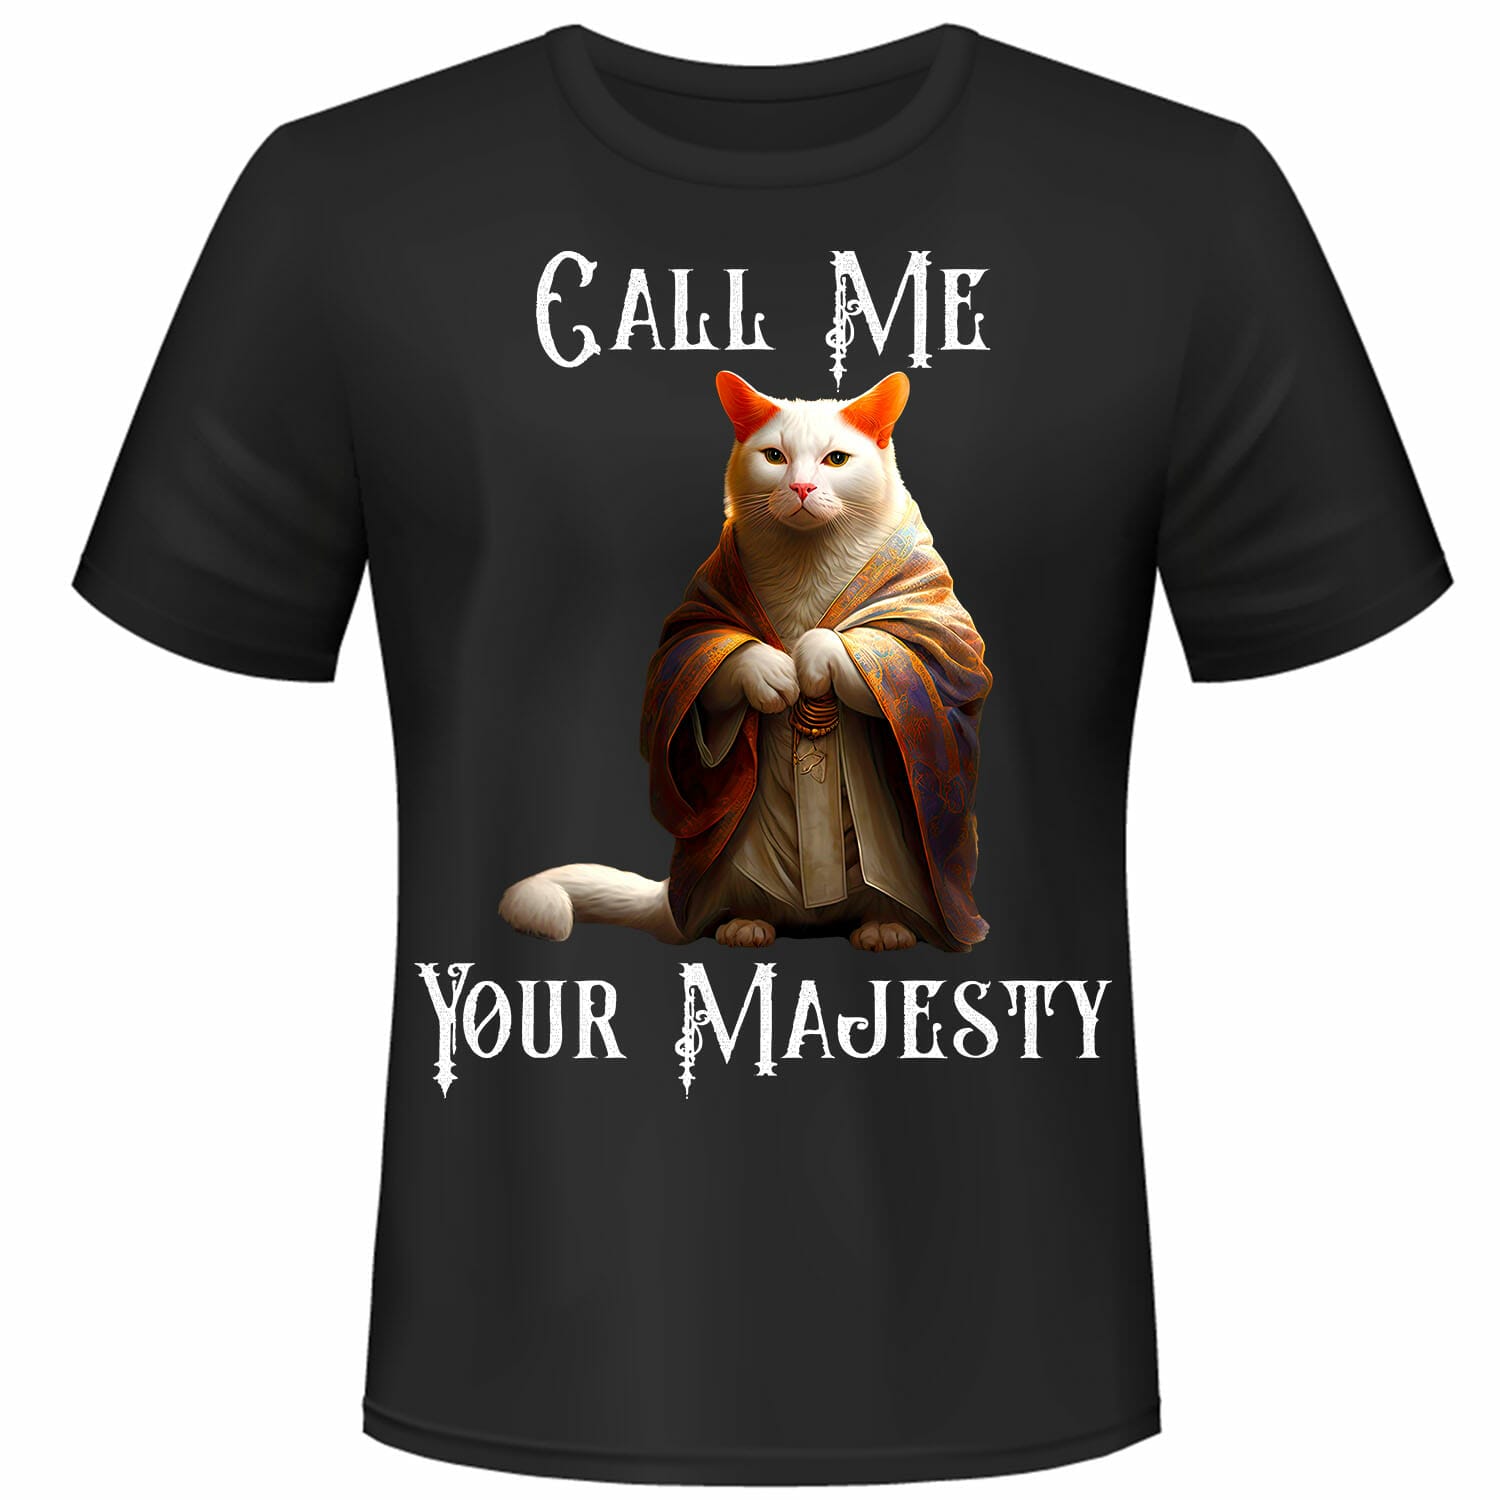 cat in a robe funny tshirt design